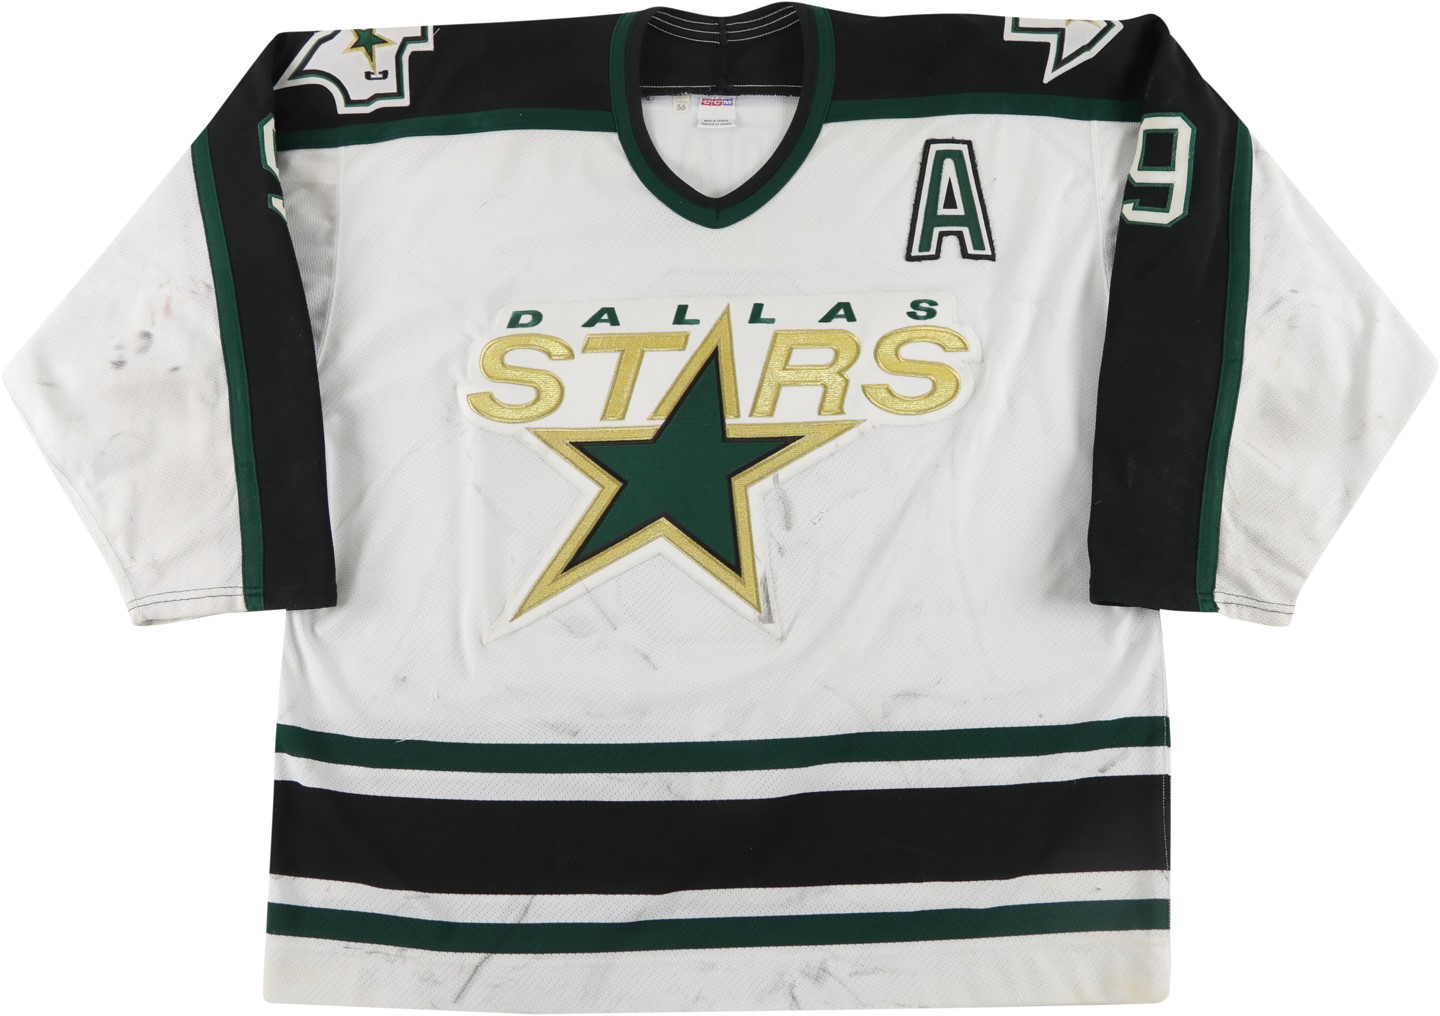 - 1998-99 Mike Modano Dallas Stars "Stanley Cup Collection" Game Worn Jersey (Photo-Matched)